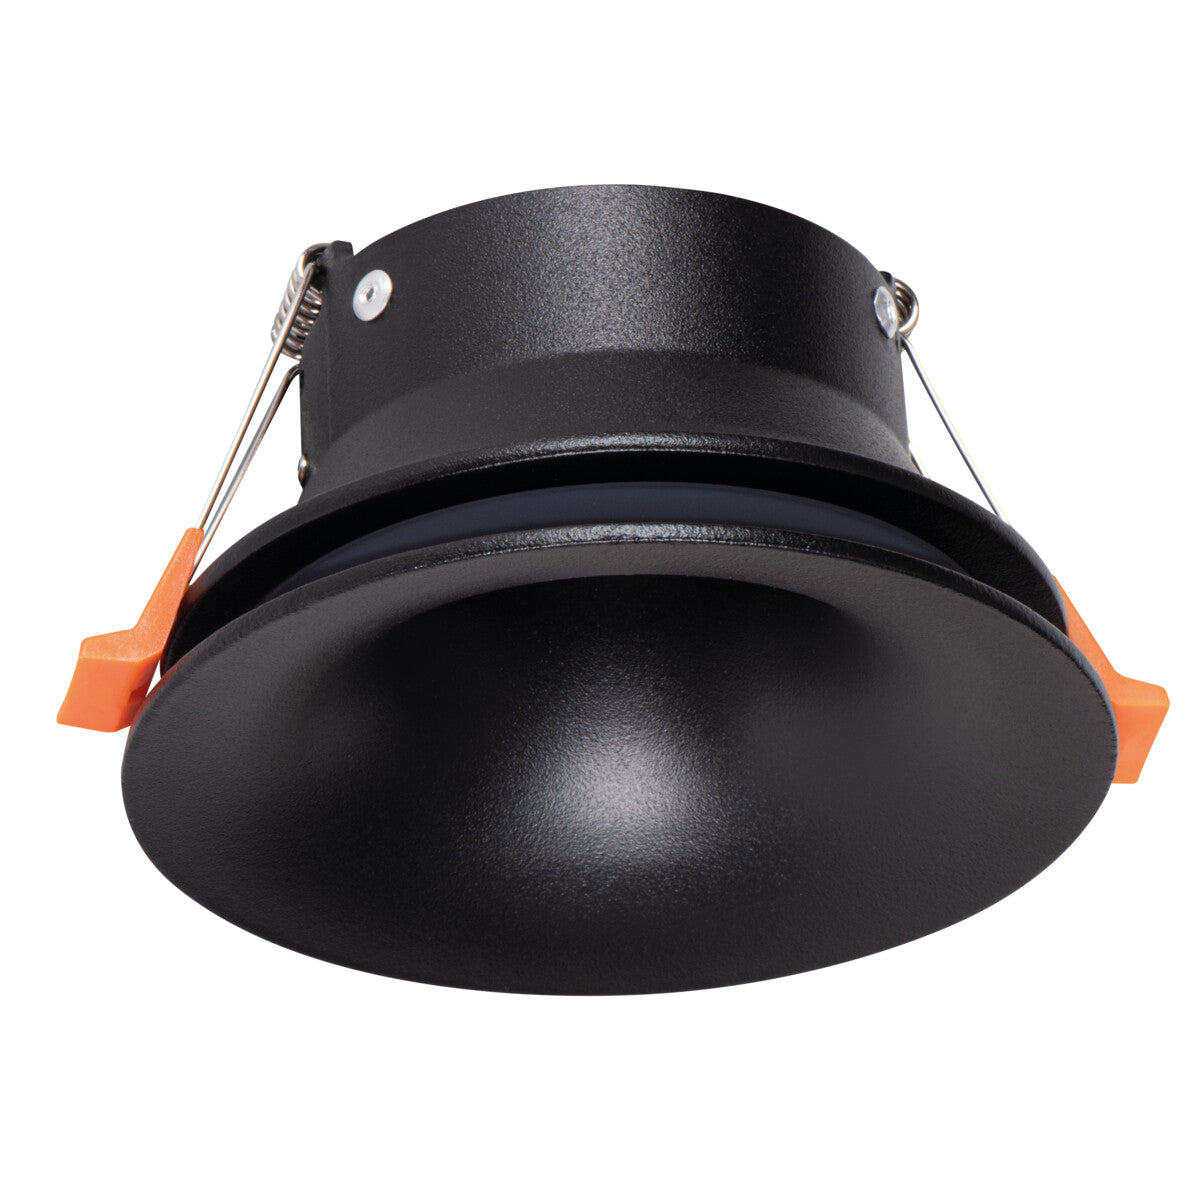 Kanlux AJAS Round Recessed Ceiling Mounted GU10 240V Spotlight Down Light Fitting